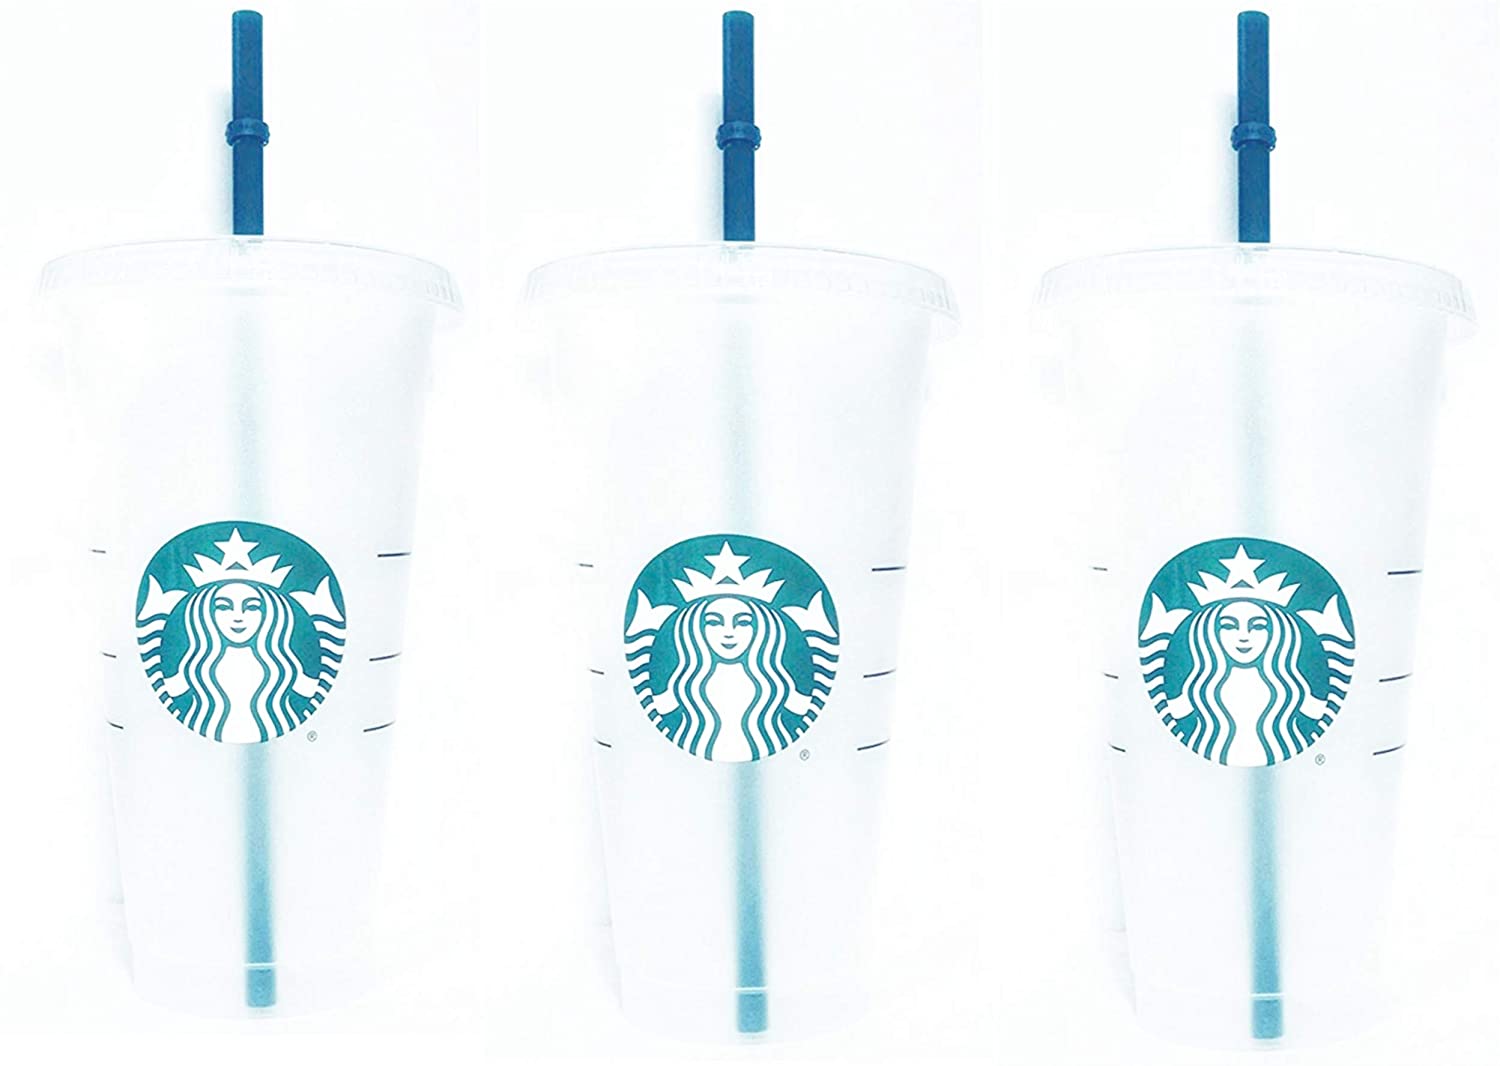 Starbucks Reusable 3 Hard Plastic Venti 24 oz Frosted Ice Cold Drink Cup with Lid and Green Straw w/Stopper